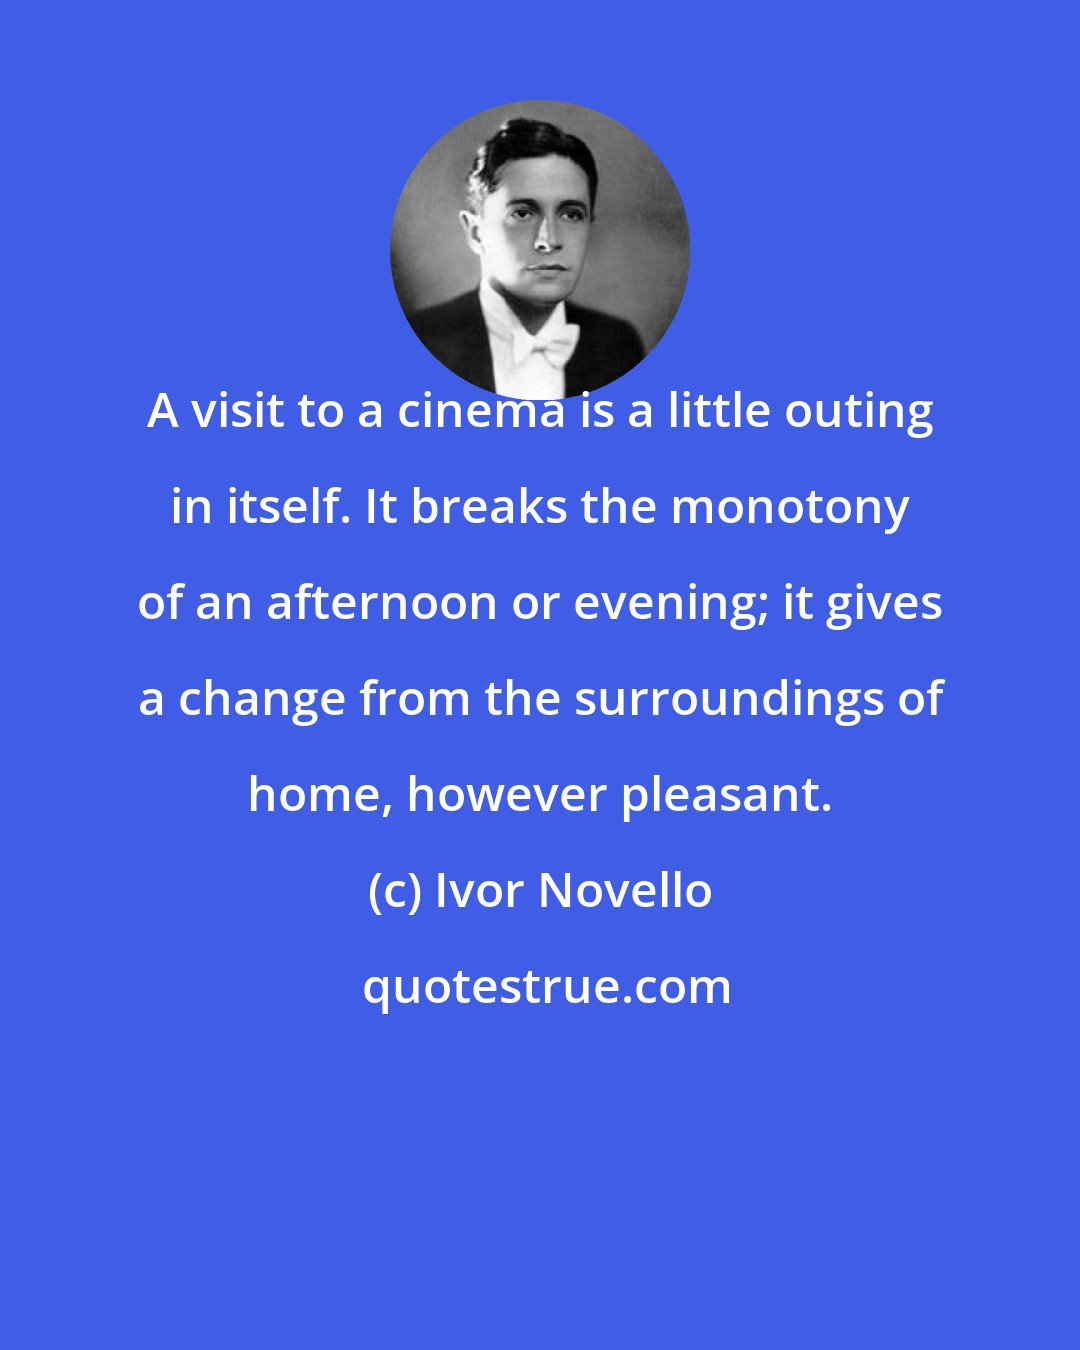 Ivor Novello: A visit to a cinema is a little outing in itself. It breaks the monotony of an afternoon or evening; it gives a change from the surroundings of home, however pleasant.